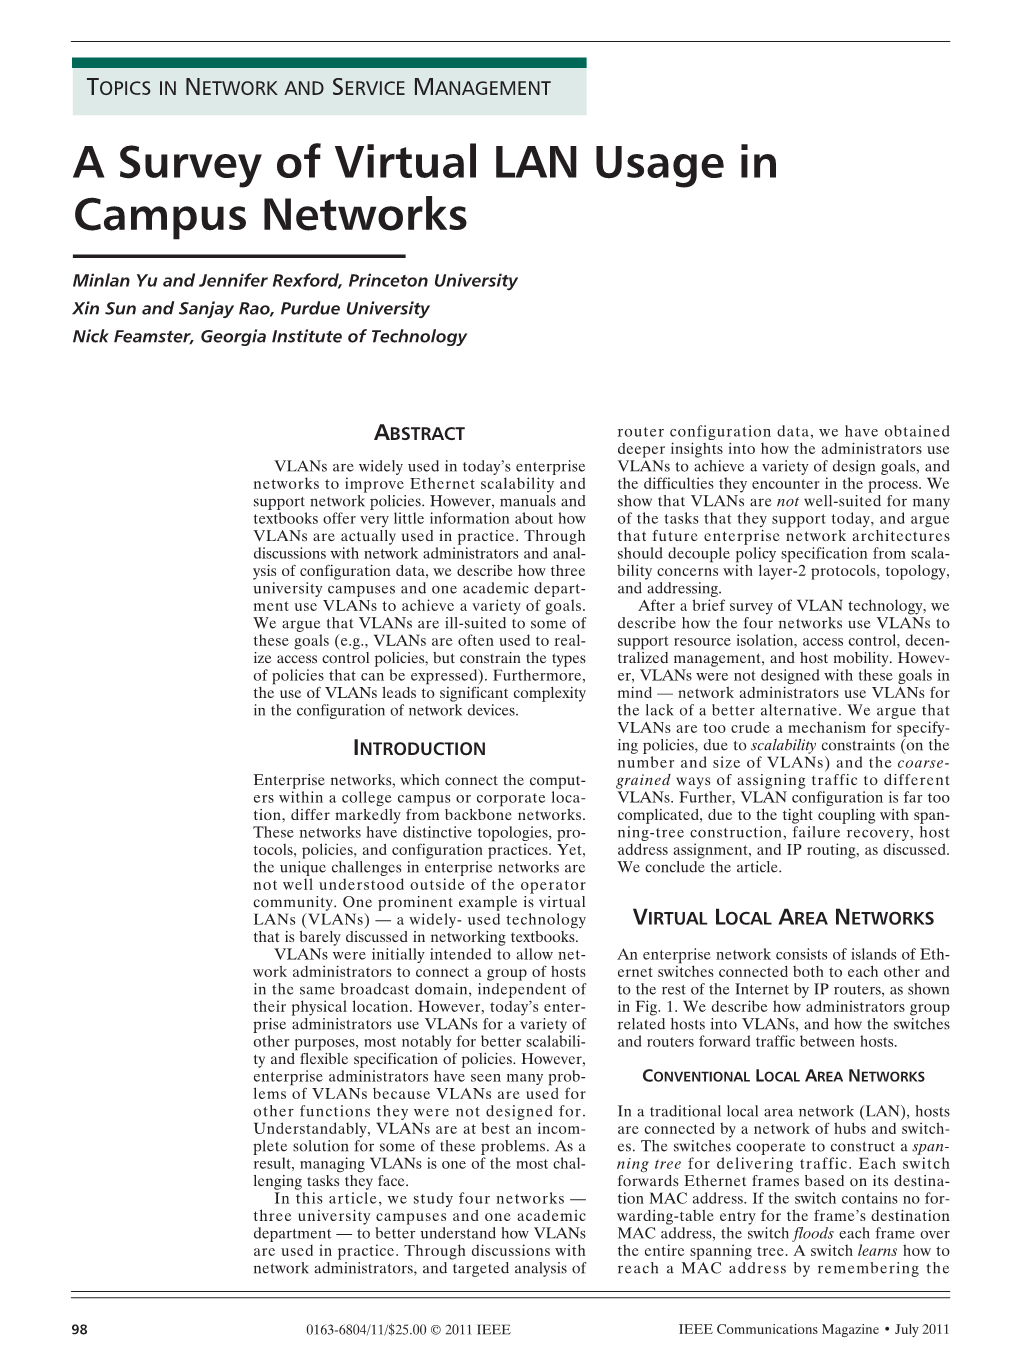 A Survey of Virtual LAN Usage in Campus Networks